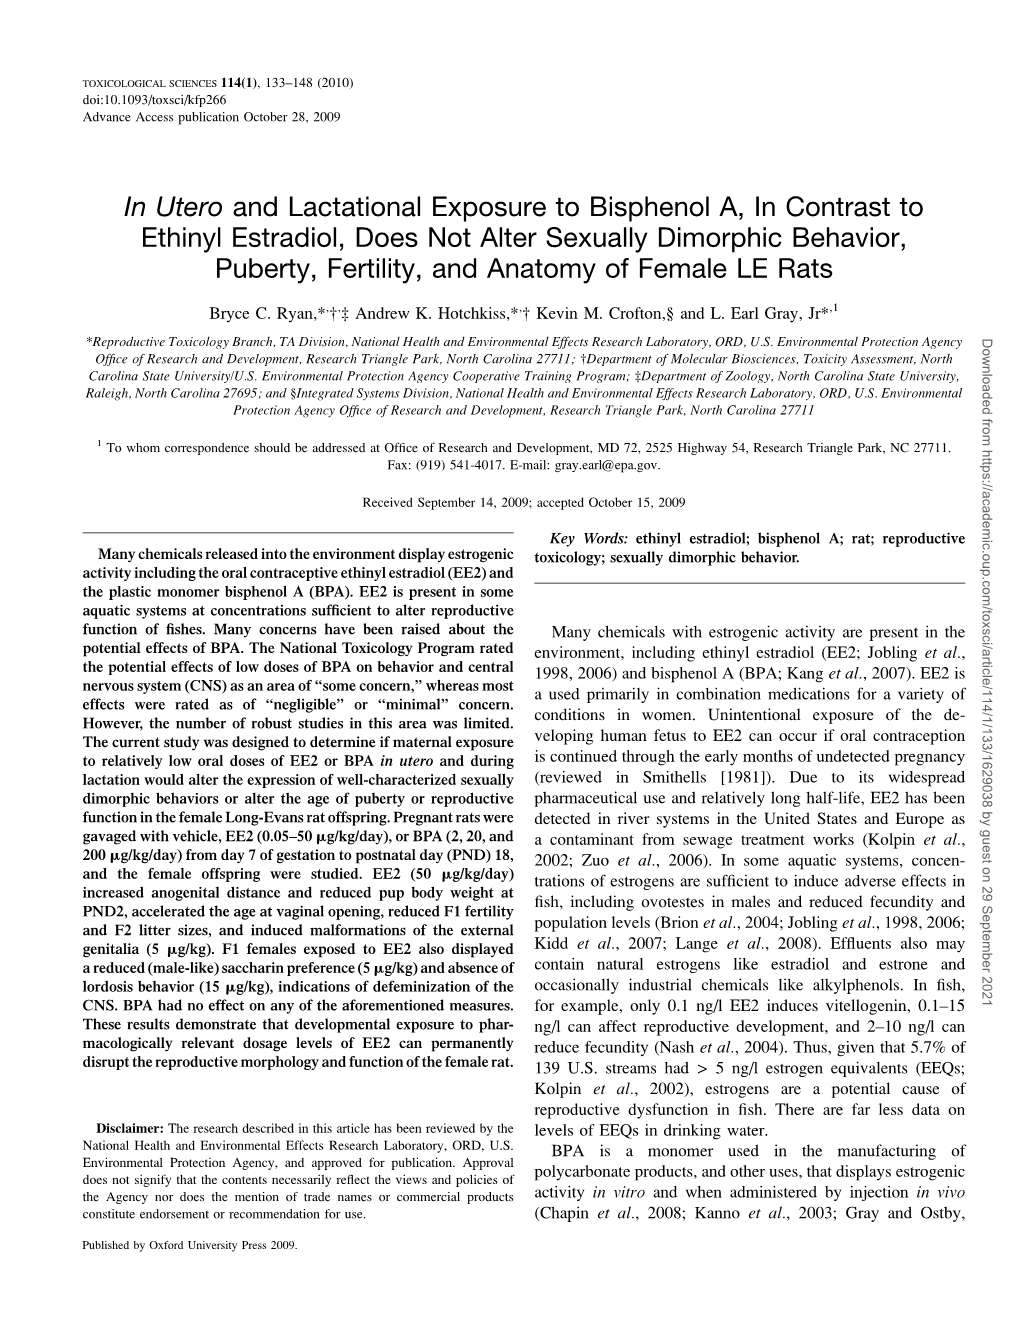 In Utero and Lactational Exposure to Bisphenol A, in Contrast to Ethinyl